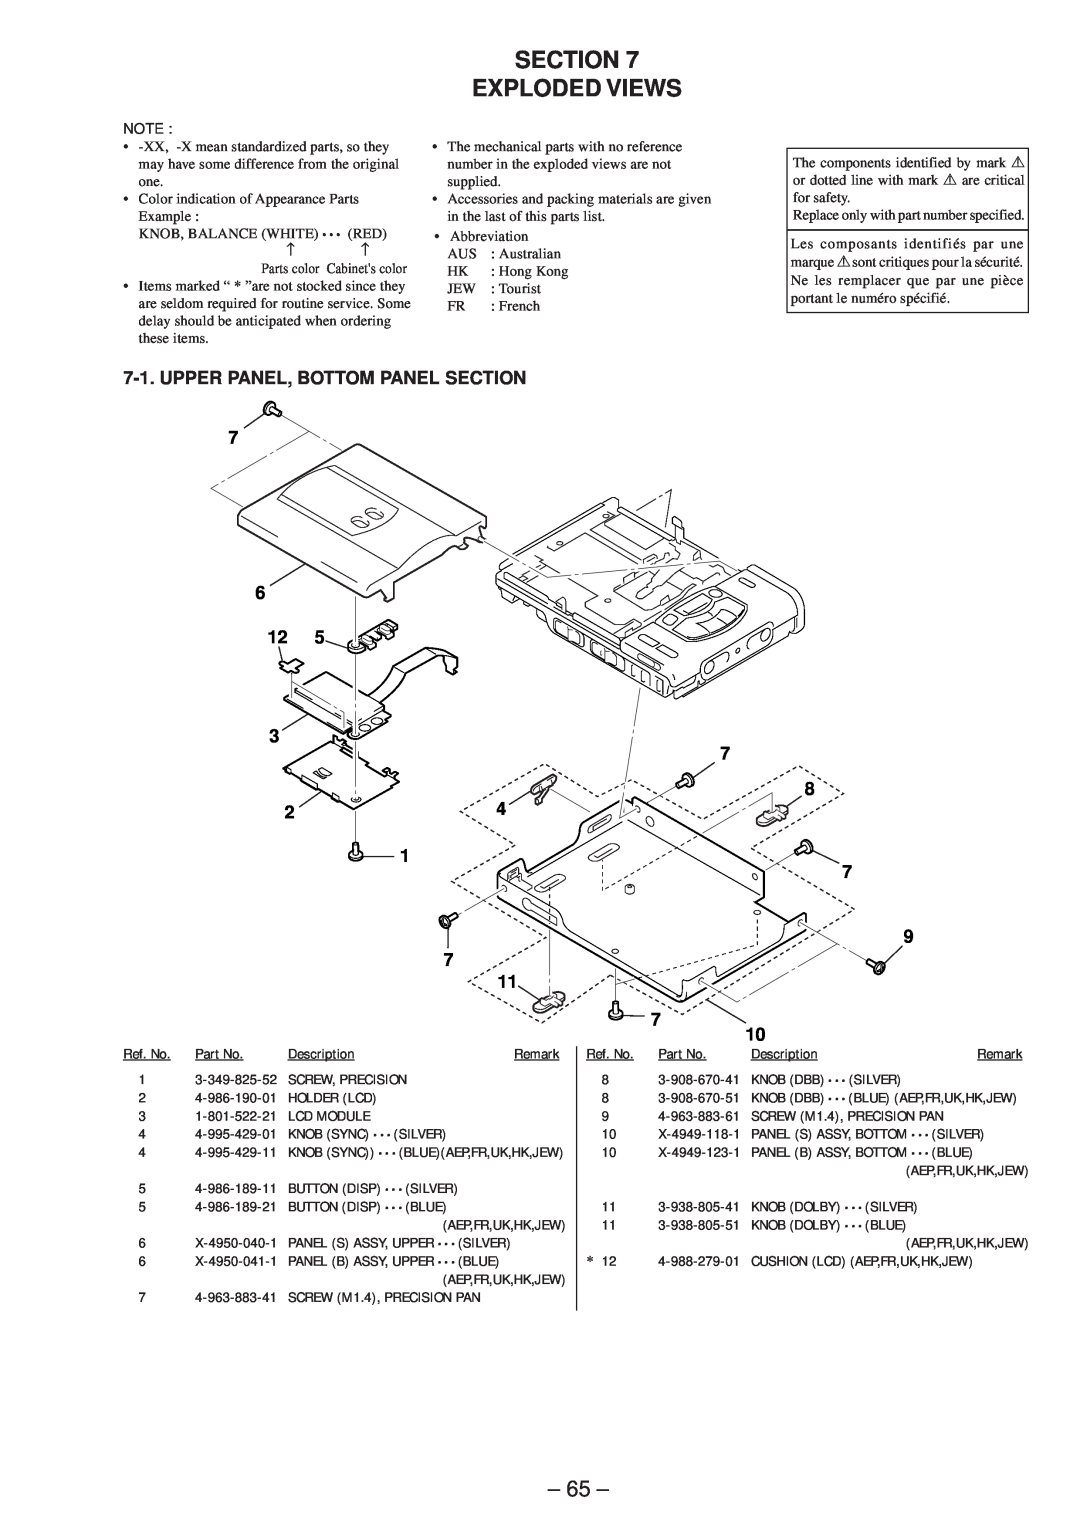 Sony MZ-R50 service manual Section Exploded Views, Description, Remark 